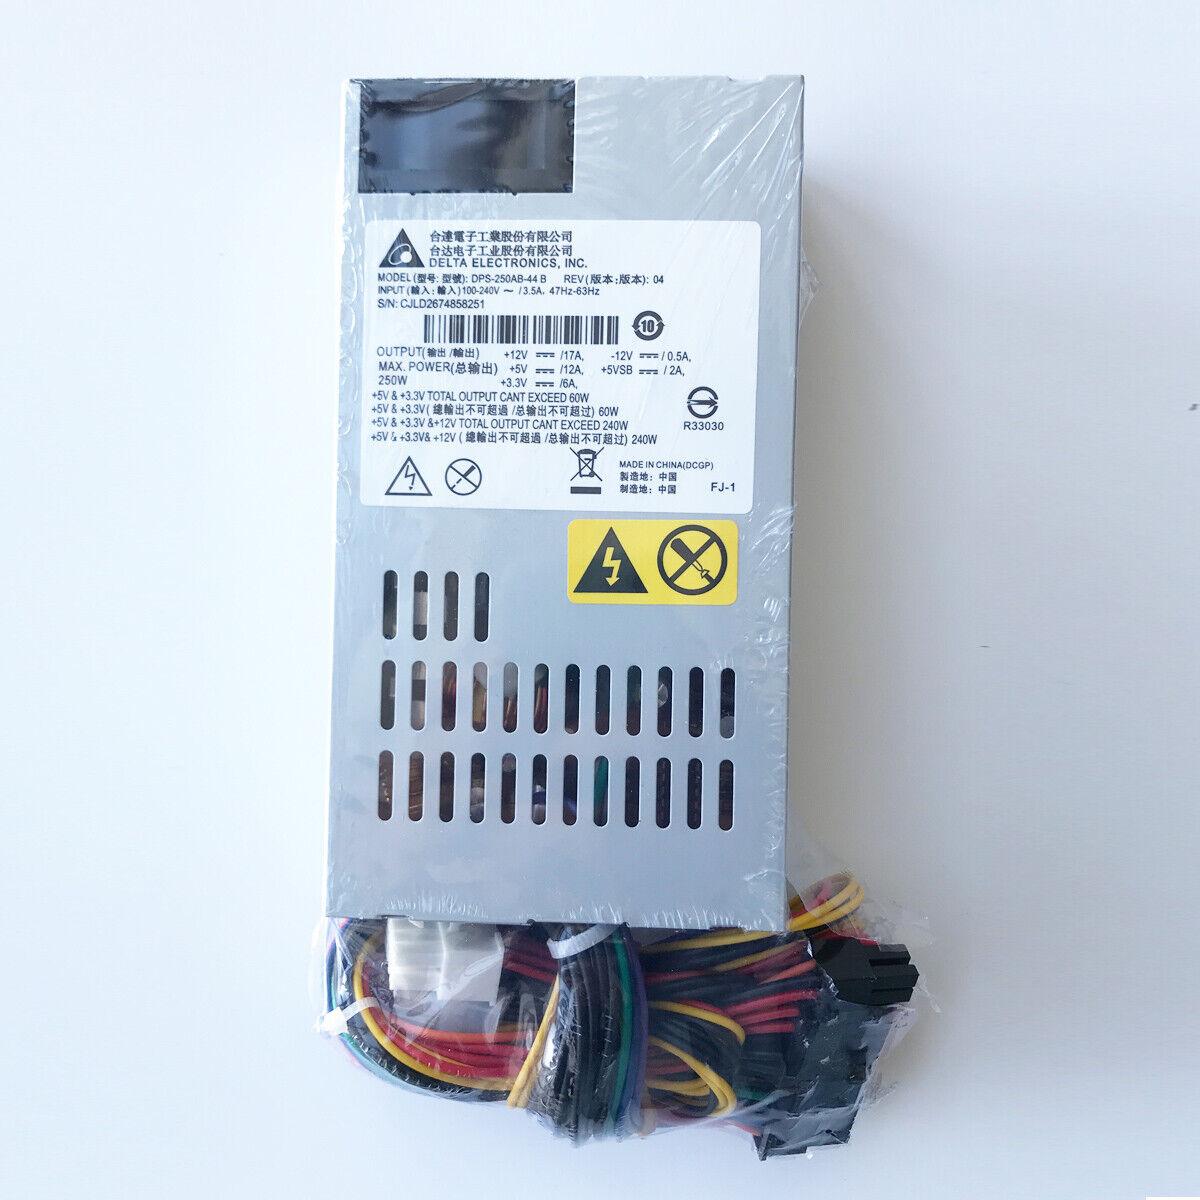 250W Power Supply For Synology DS1513+ DS1512+ DS1511+ DS1010+ RS814+ RS815+ US